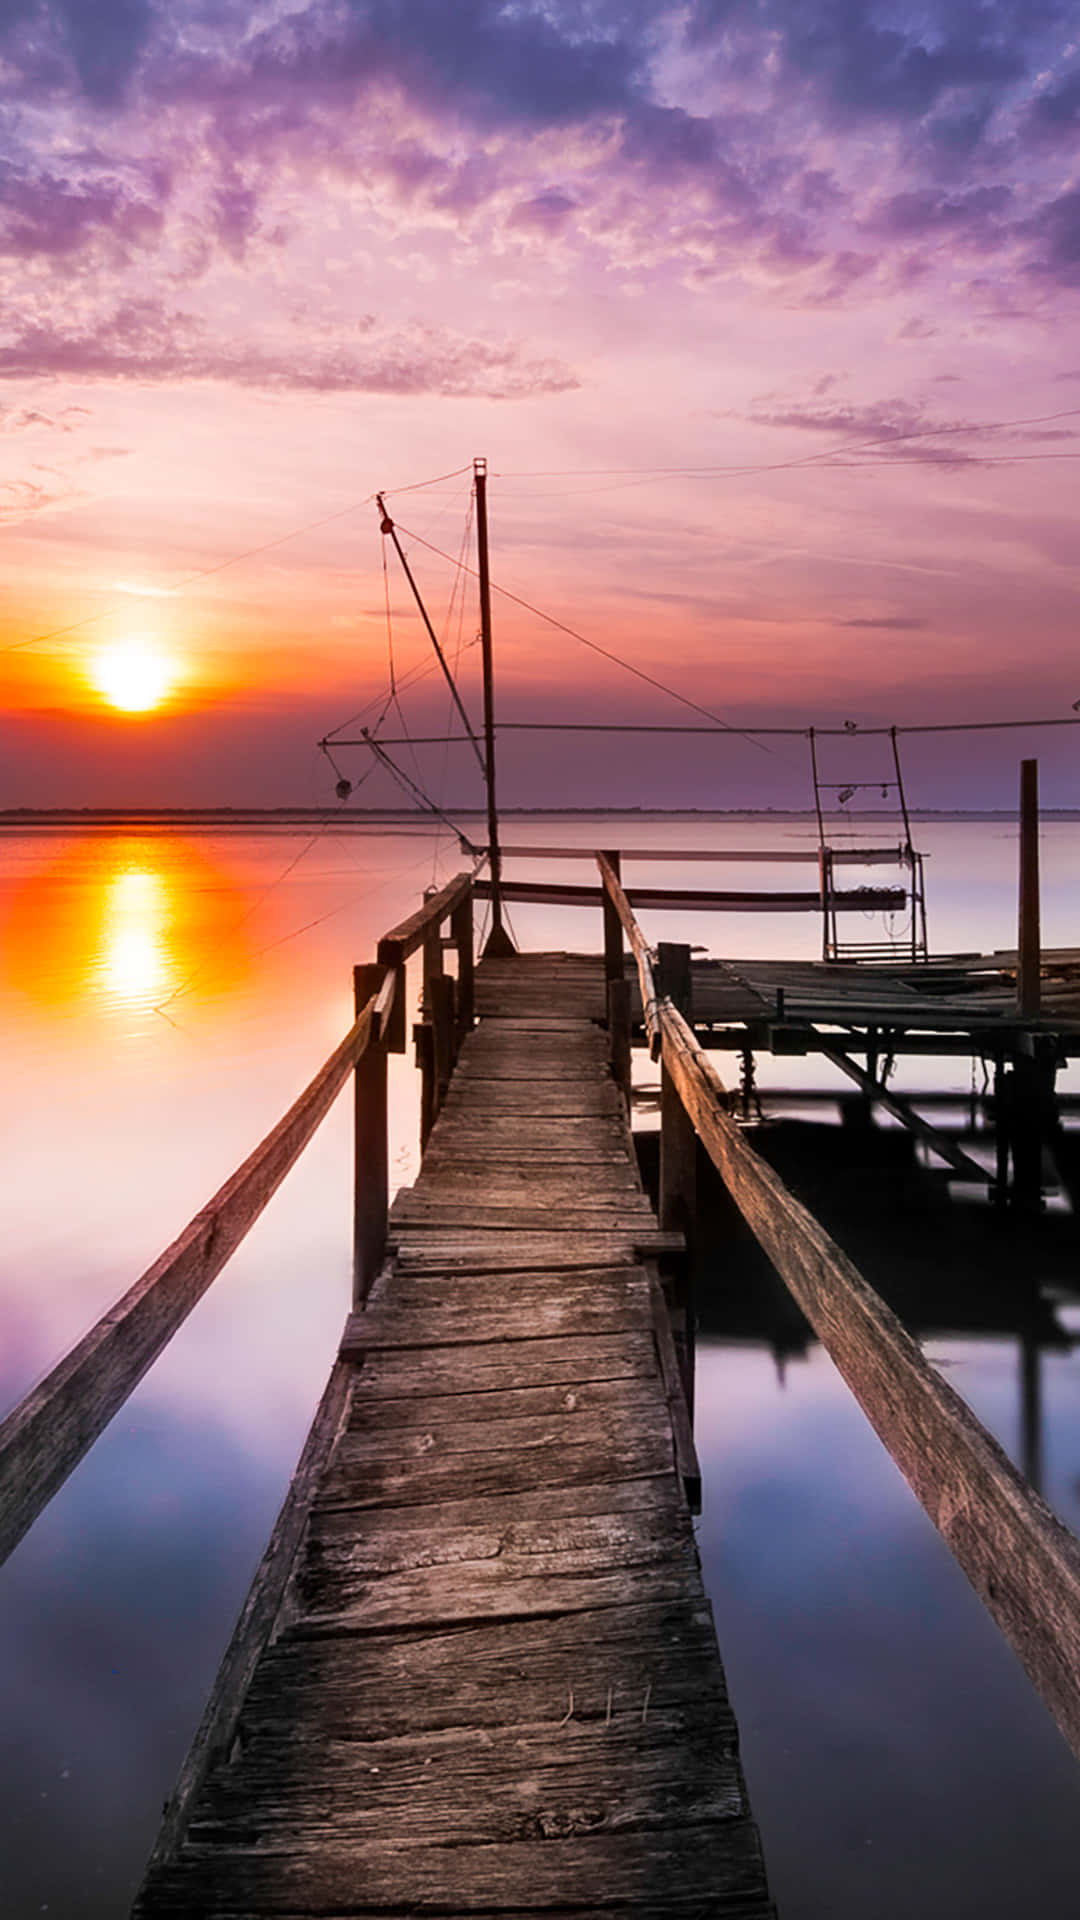 A Wooden Dock With A Sunset Over The Water